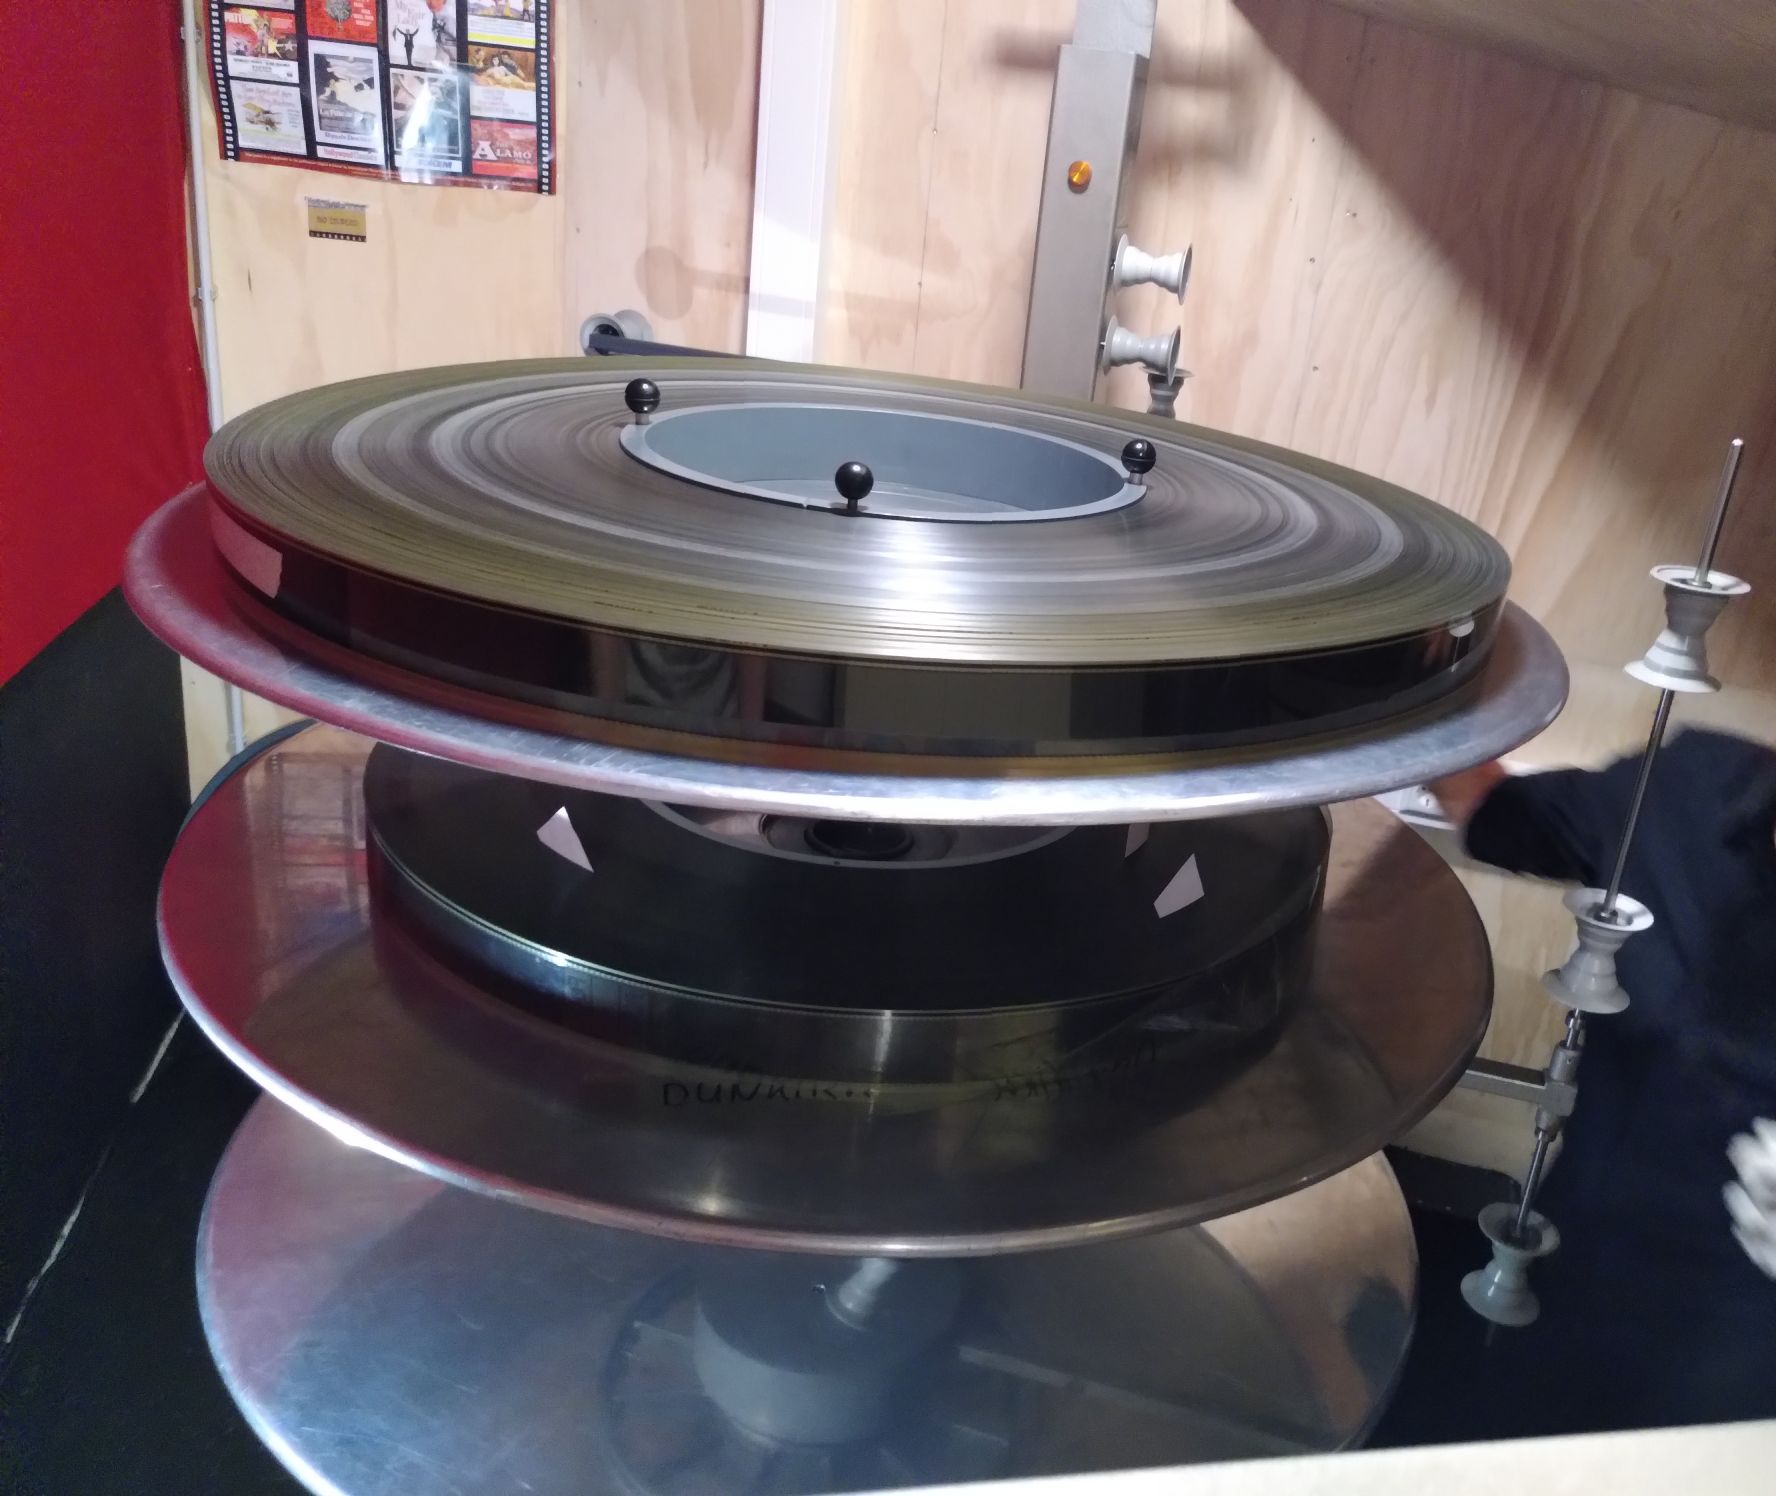 Photo of the 70mm films, on some kind of disc-like shelf.